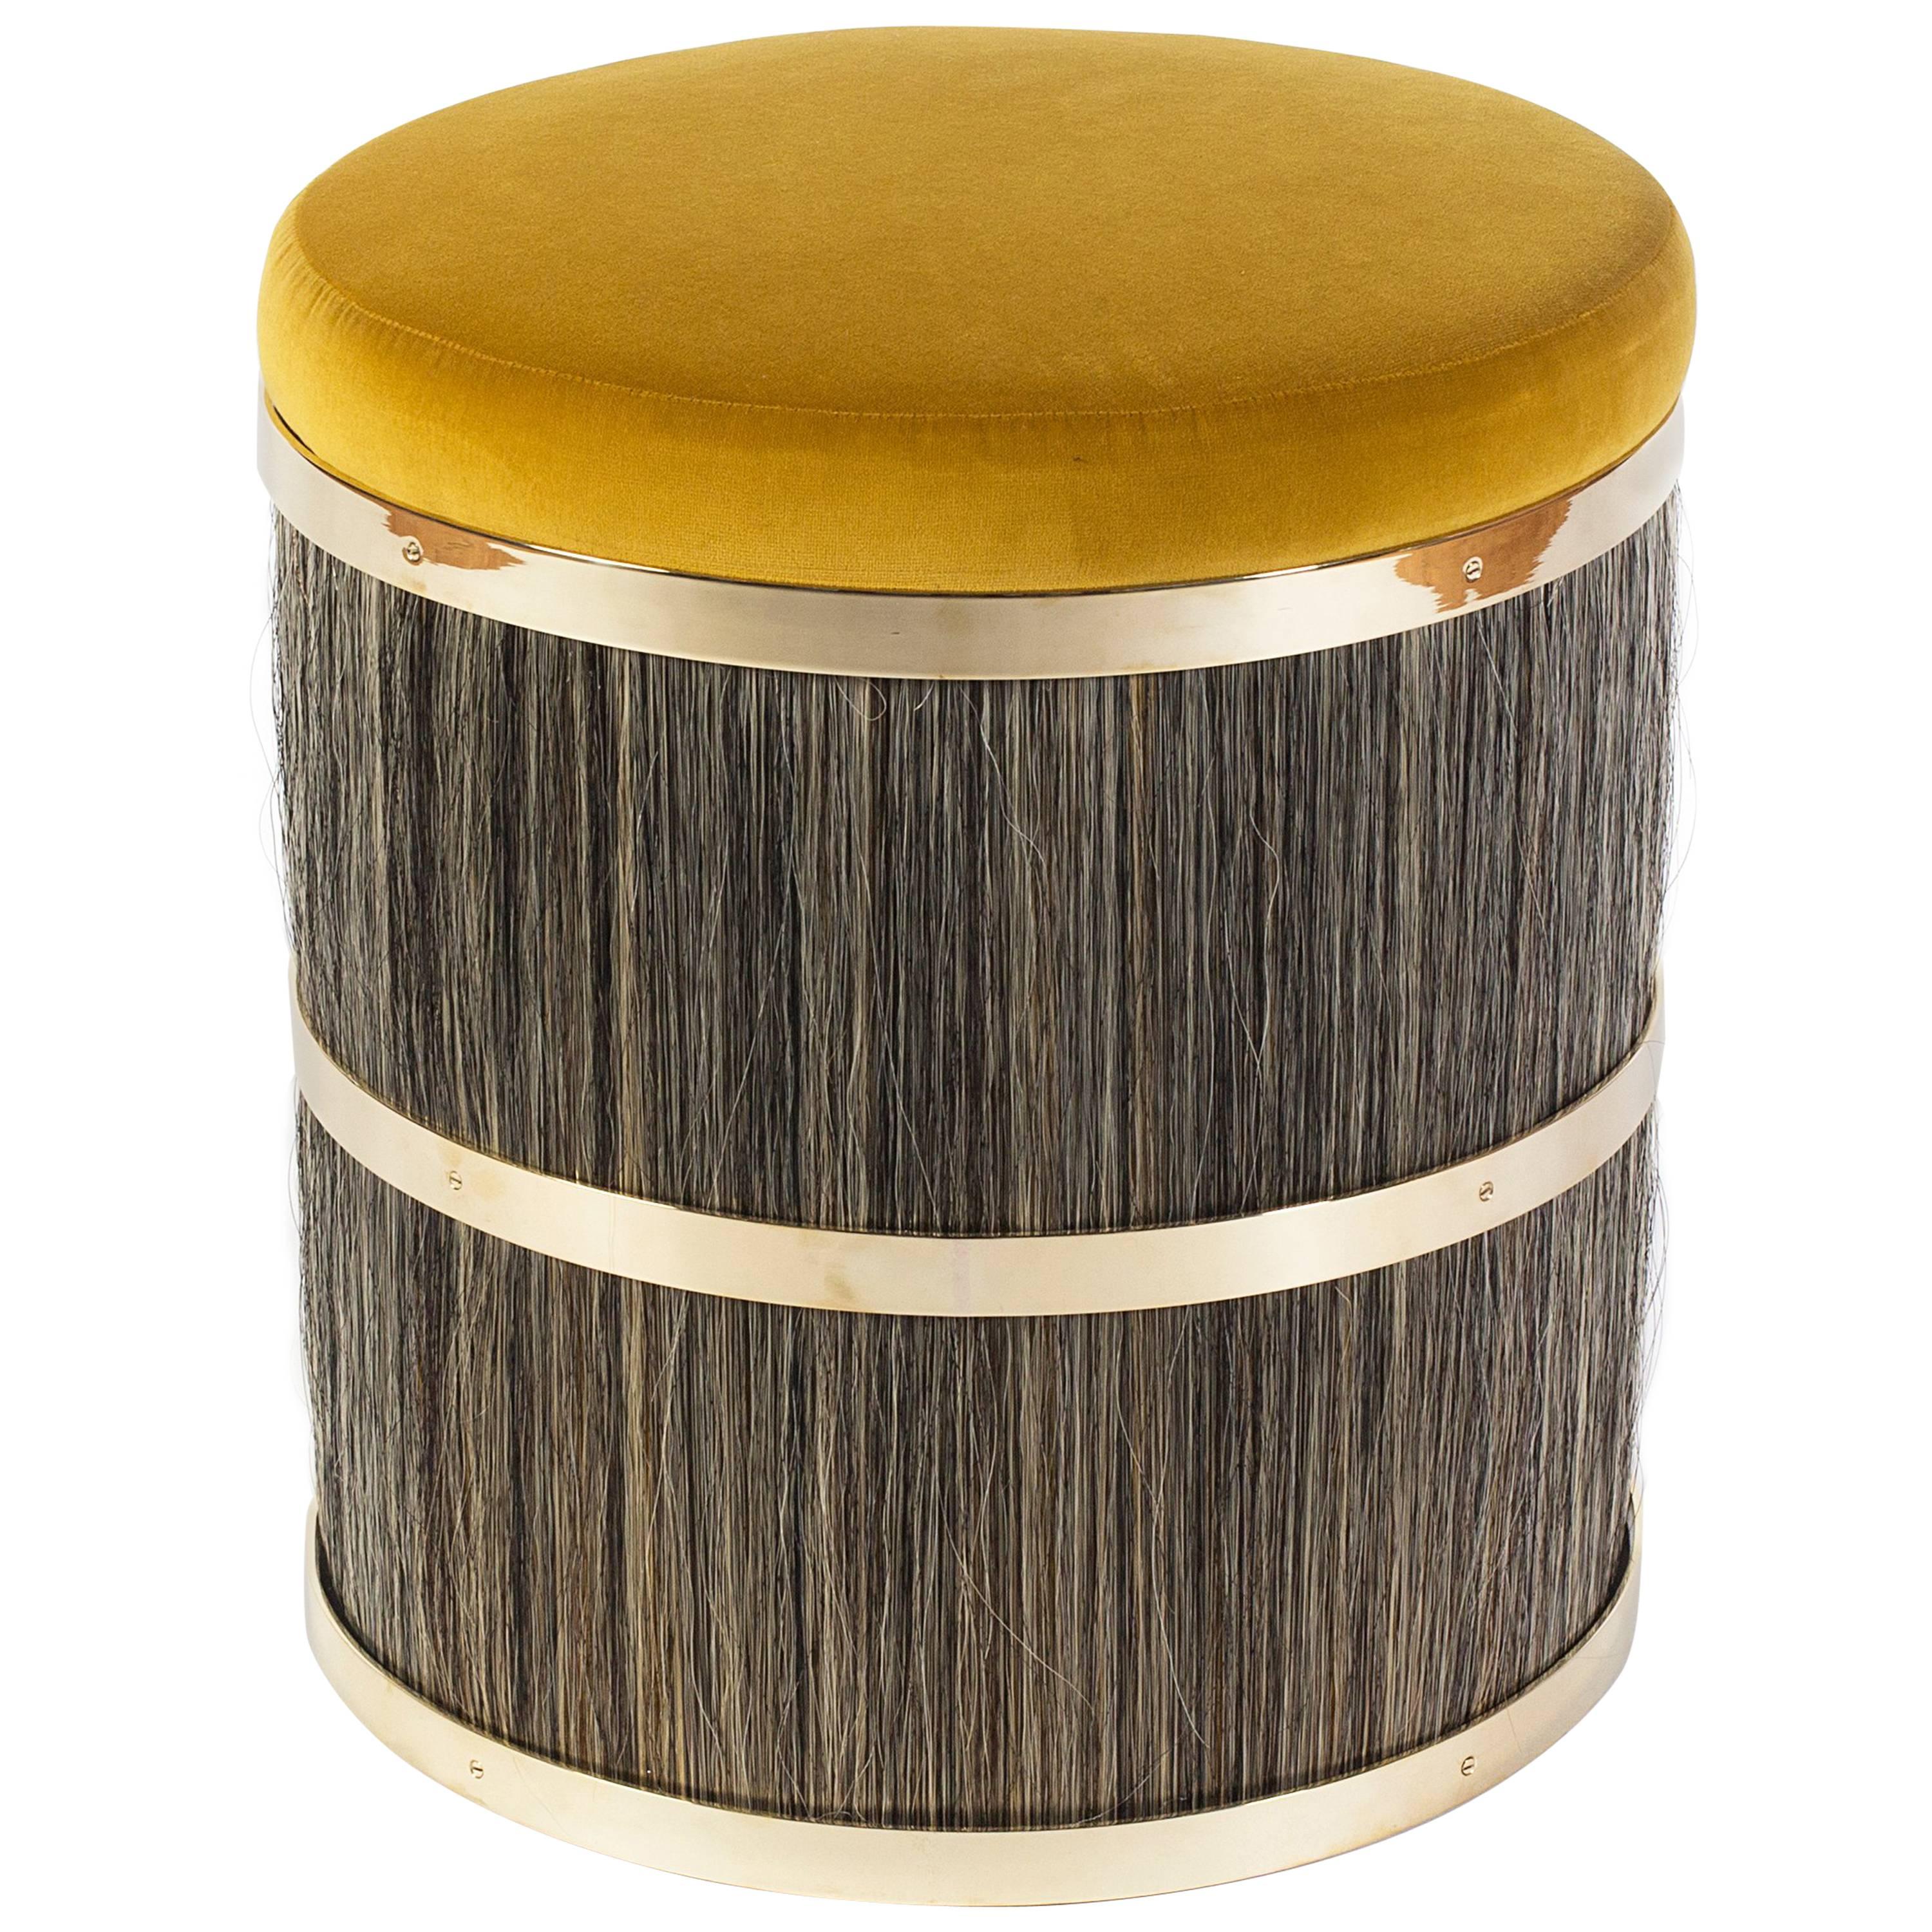 Konekt Thing 2 Stool with Polished Brass, Horse Hair and Velvet